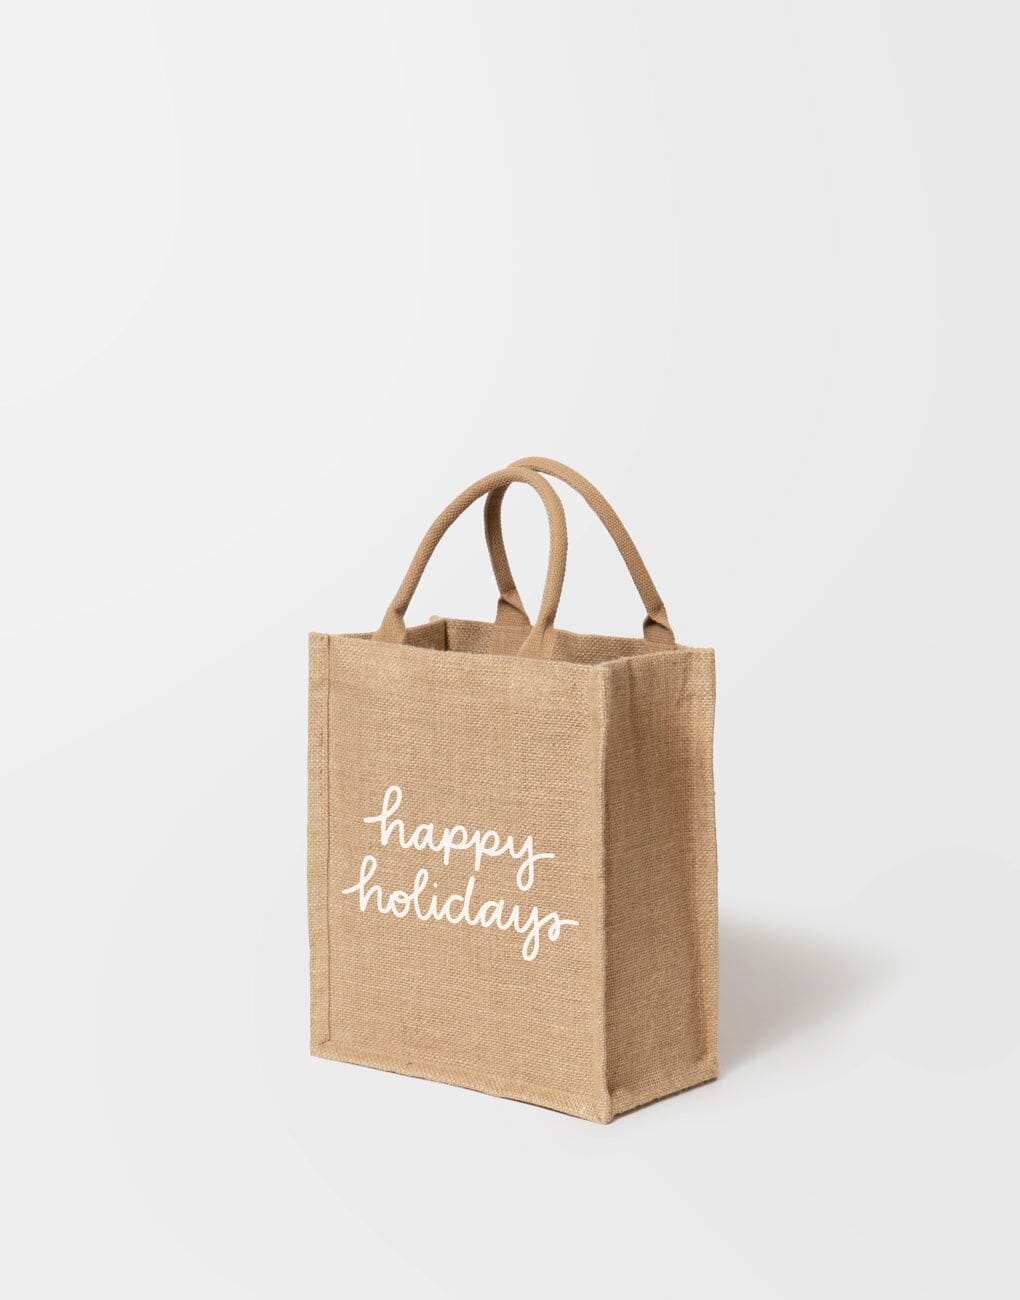 Medium Happy Holidays Reusable Gift Totes | The Little Market